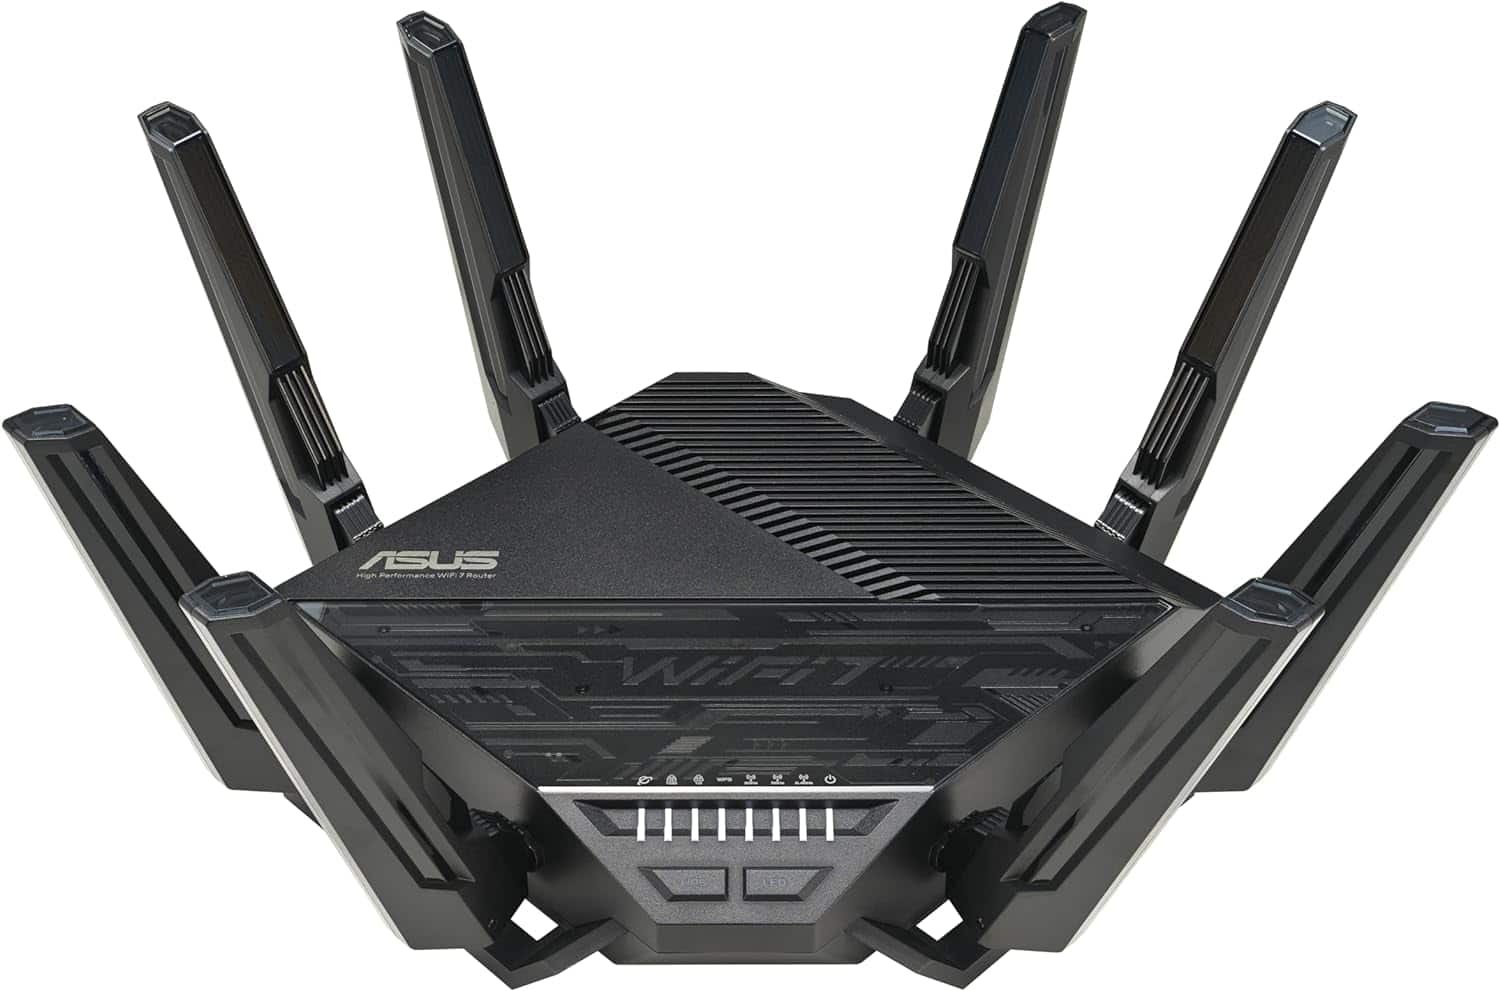 Which Router Should I Buy?